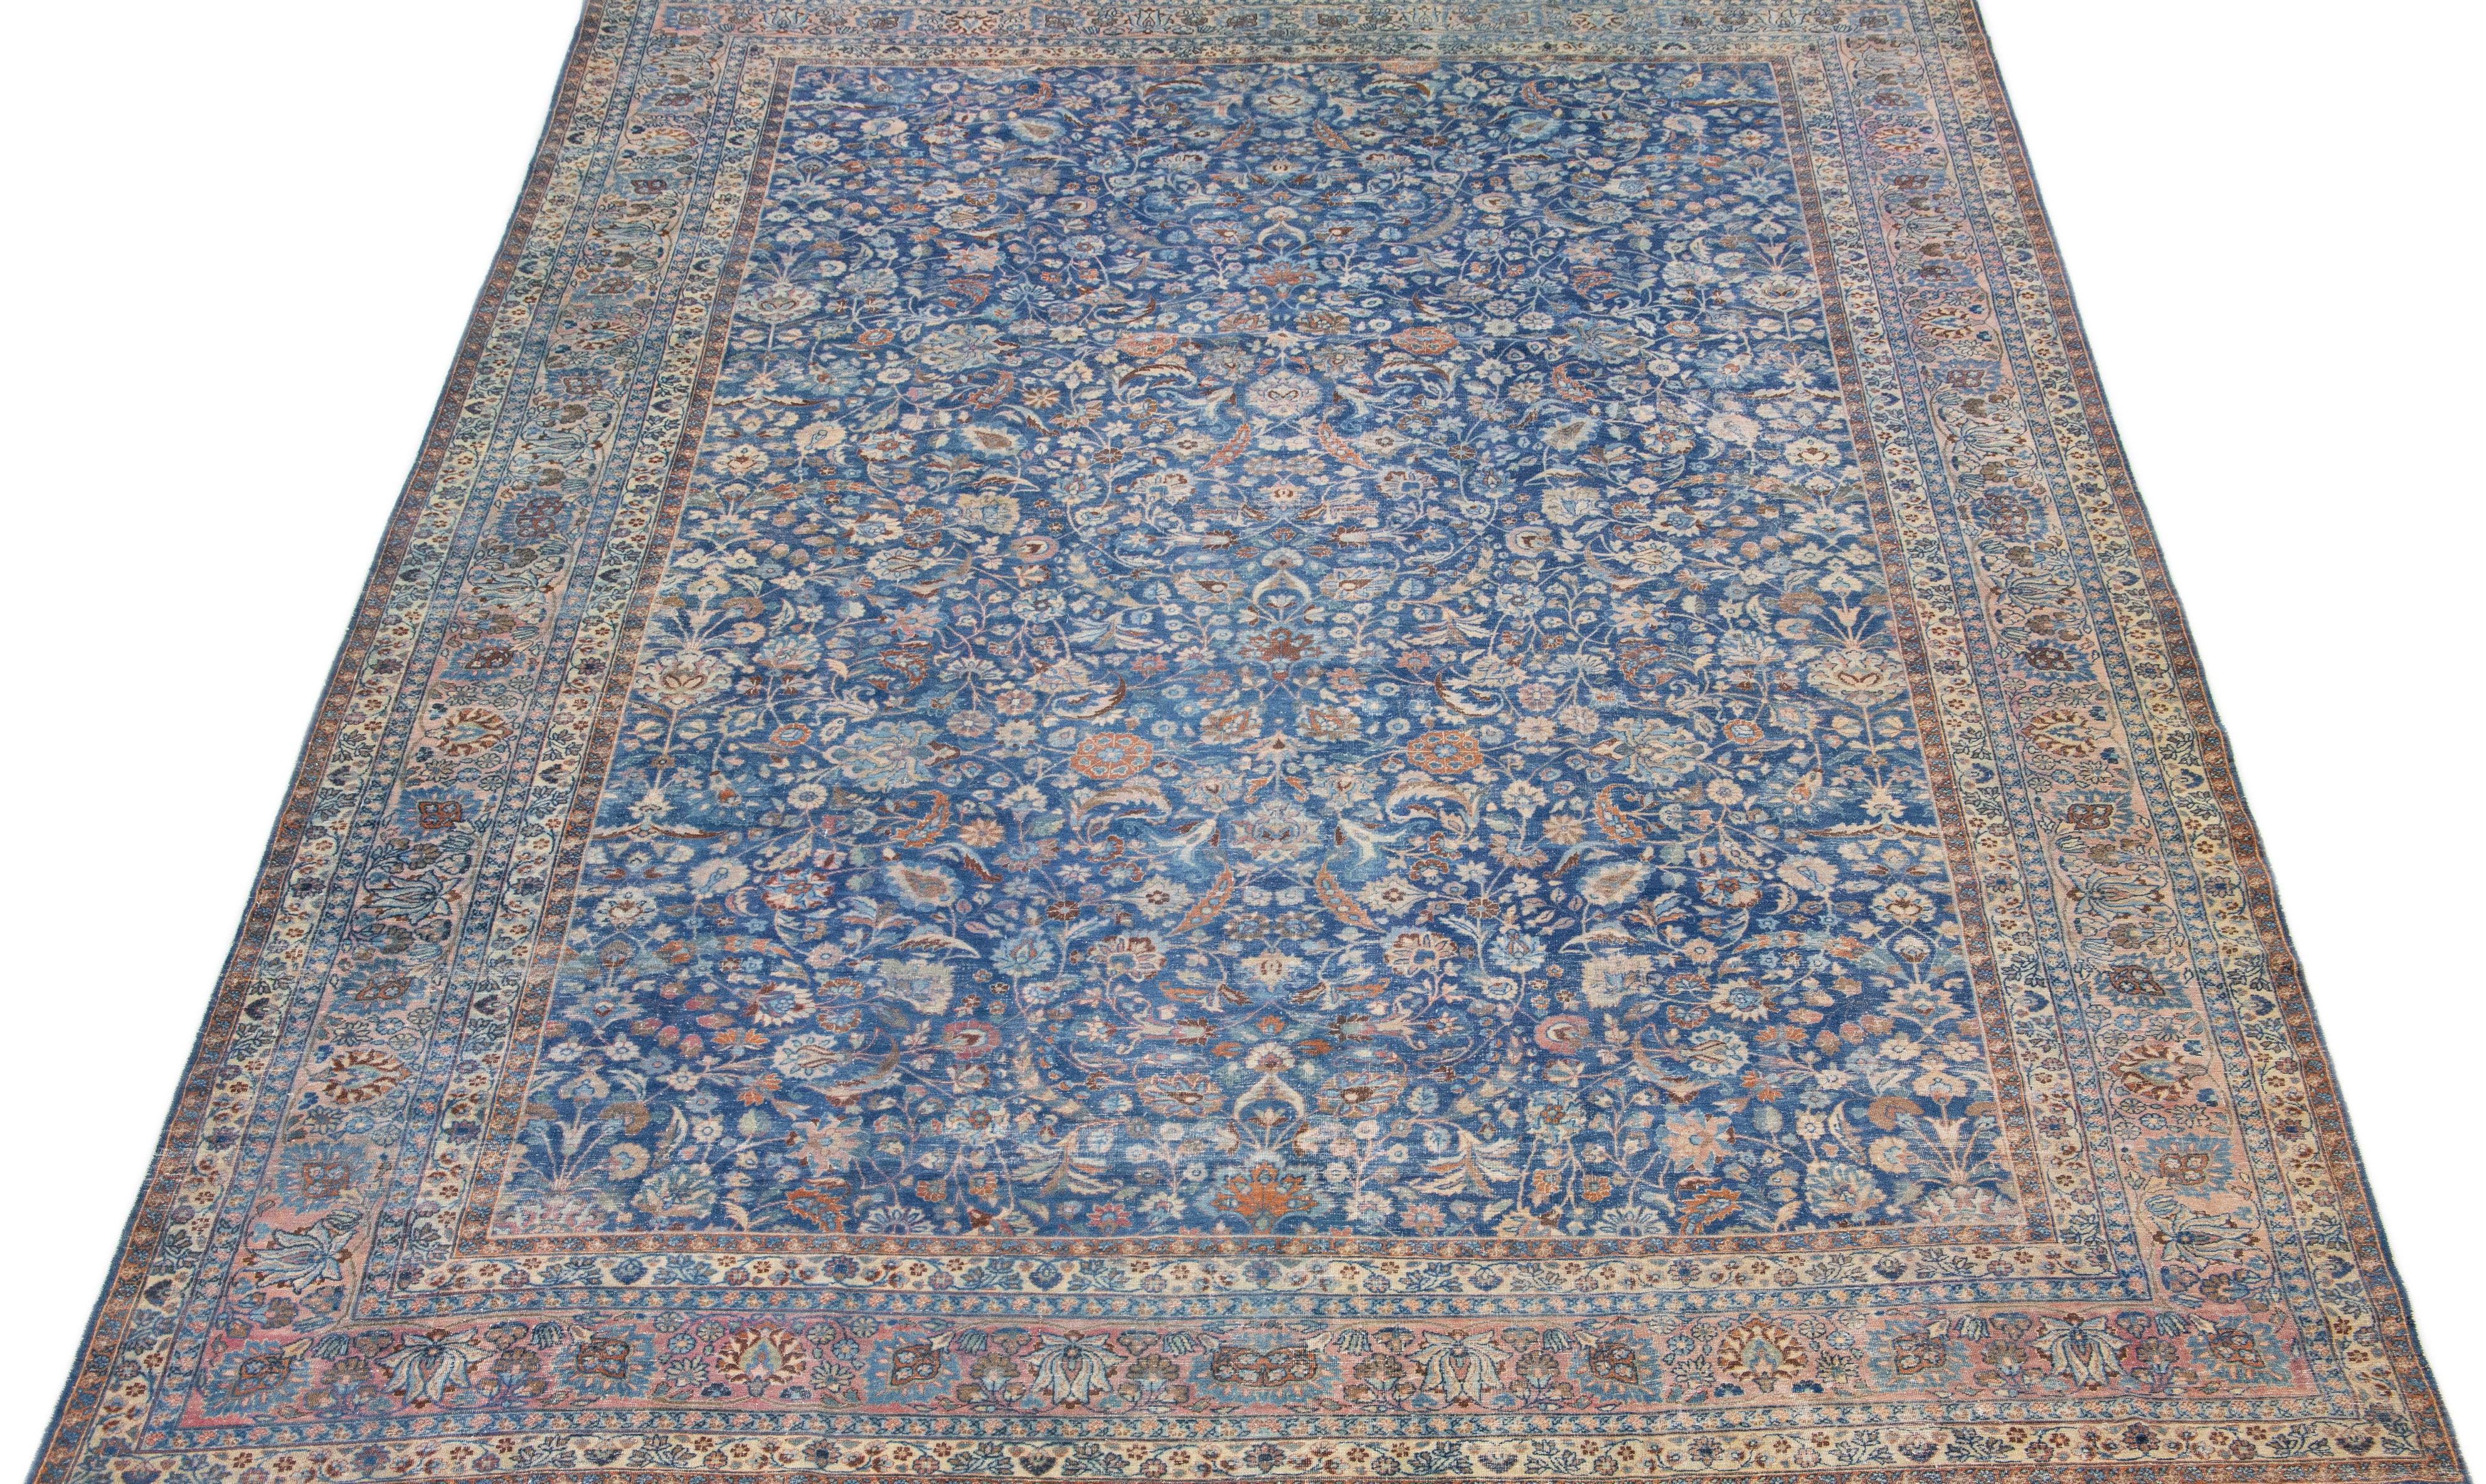 This luxurious Antique Mashad wool rug features a blue color field, with a rose-framed, Classic floral pattern accentuated by beige details.

This rug measures: 12' x 17'8